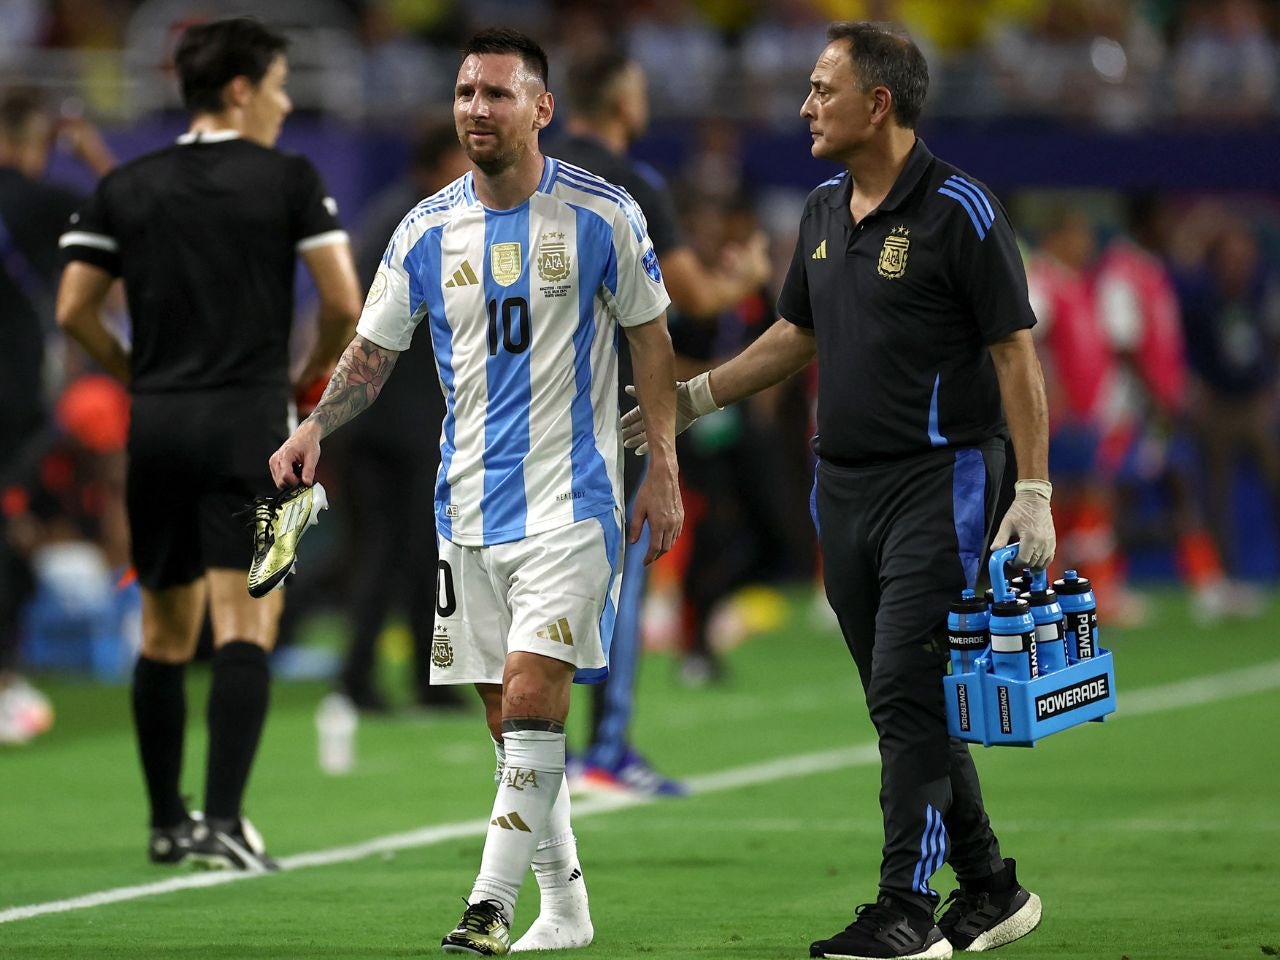 Lionel Messi left in tears from ankle injury in Argentina's Copa America final win